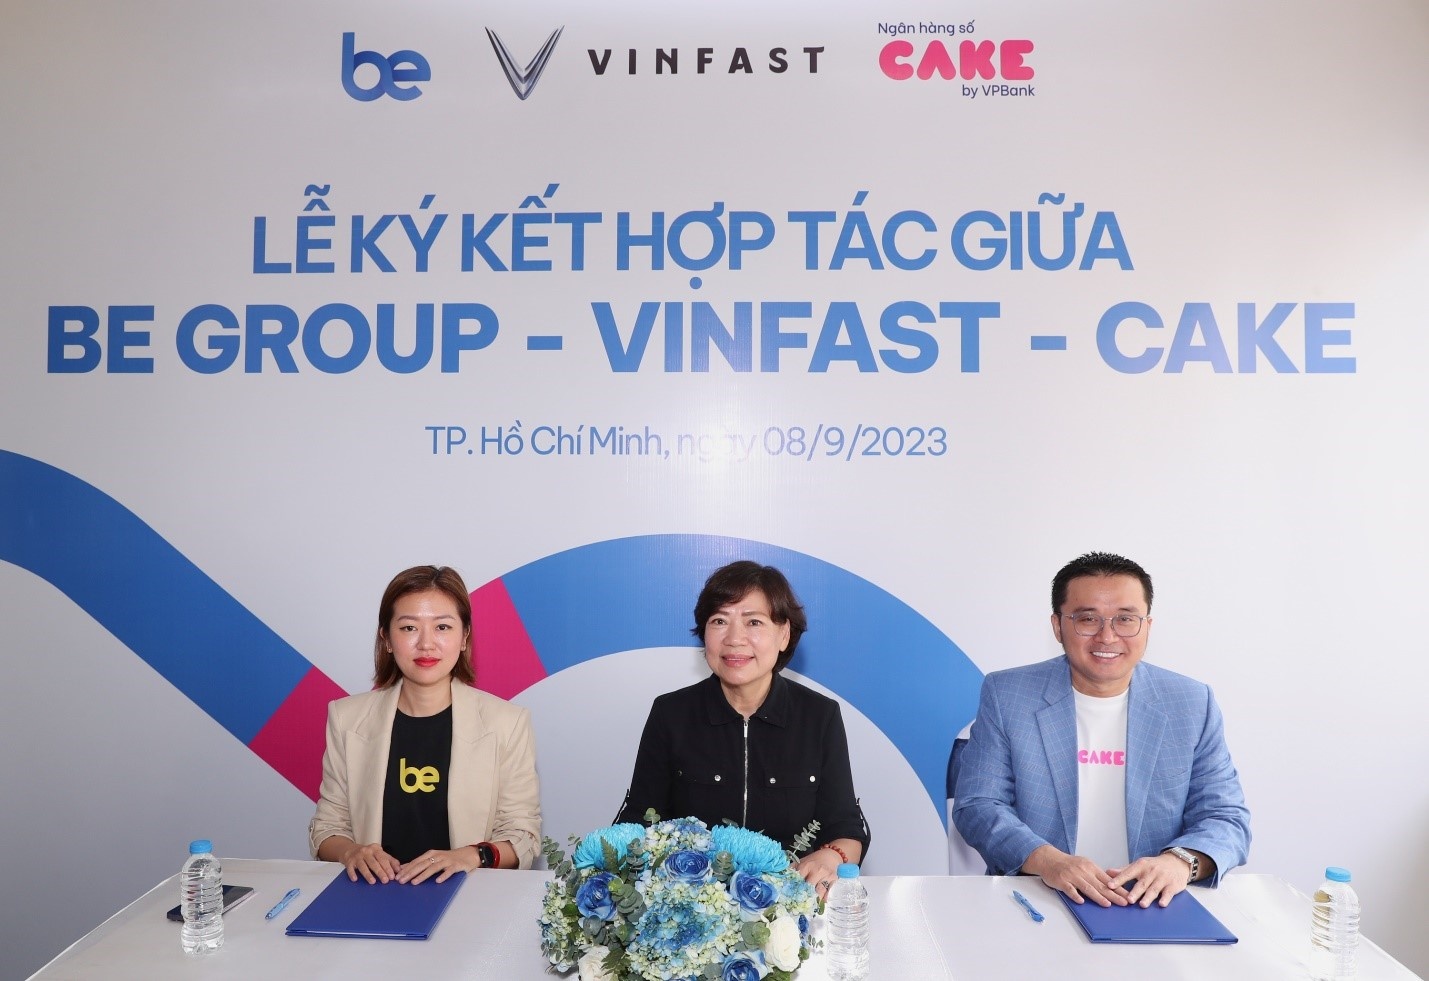 VinFast working with VPBank and Be Group to promote EV use